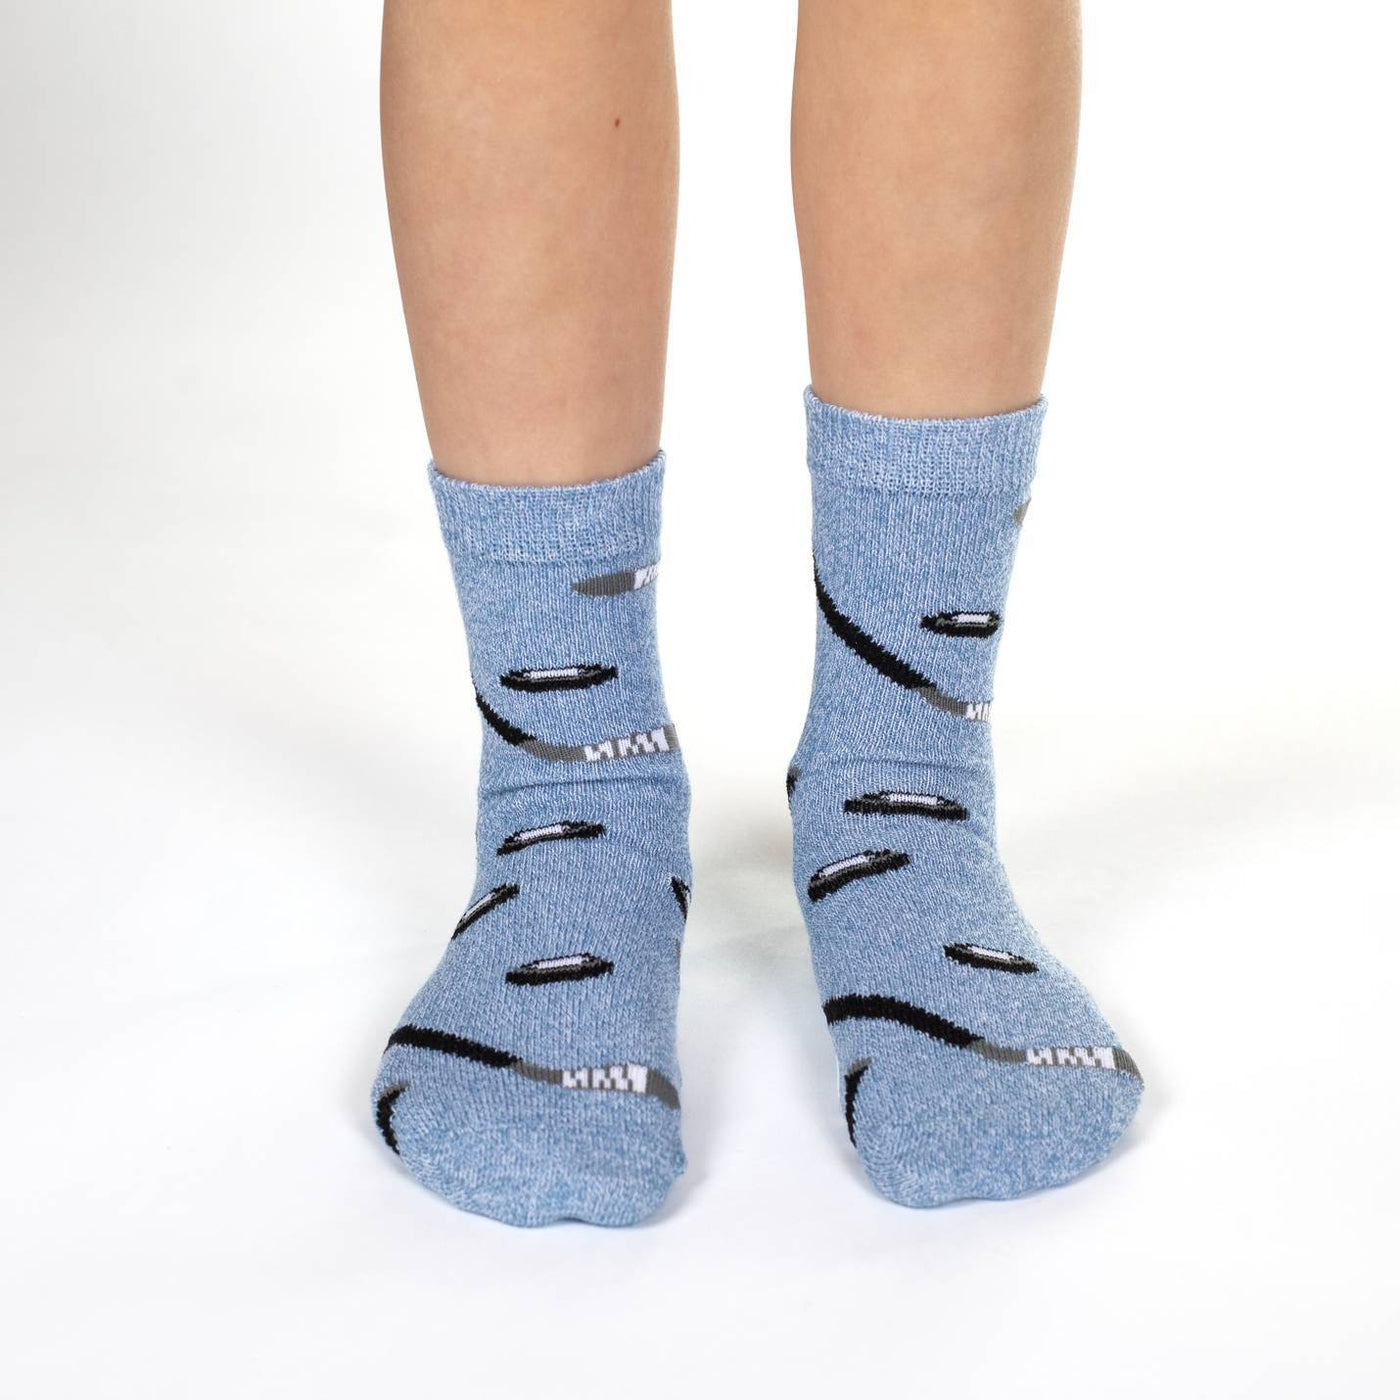 Kids "Bowling, Hockey and Soccer" Socks by Good Luck Sock